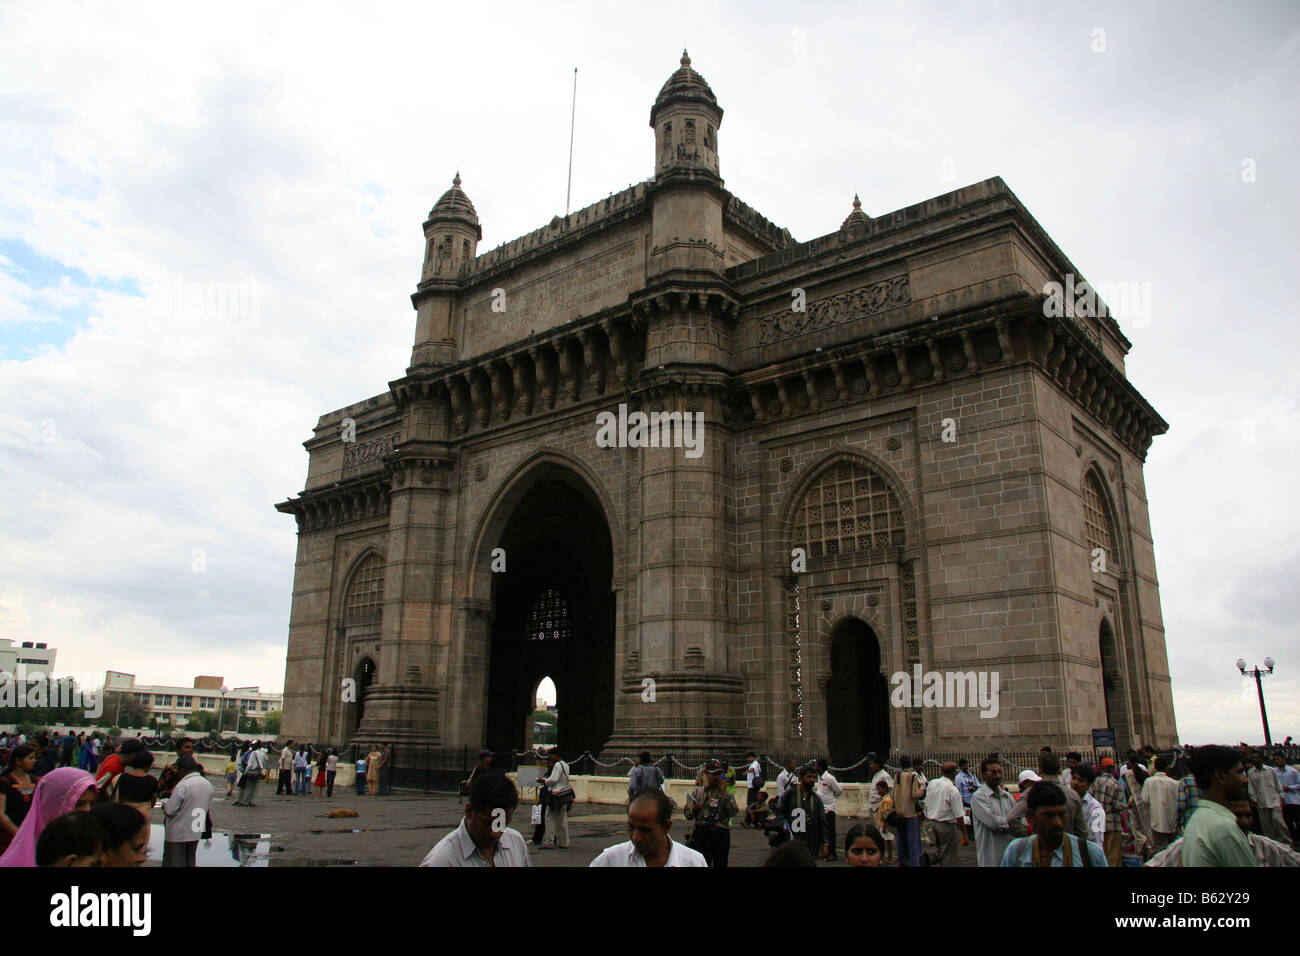 The Gateway of India in Mumbai, India. The area is popular with tourists from India and abroad. Stock Photo